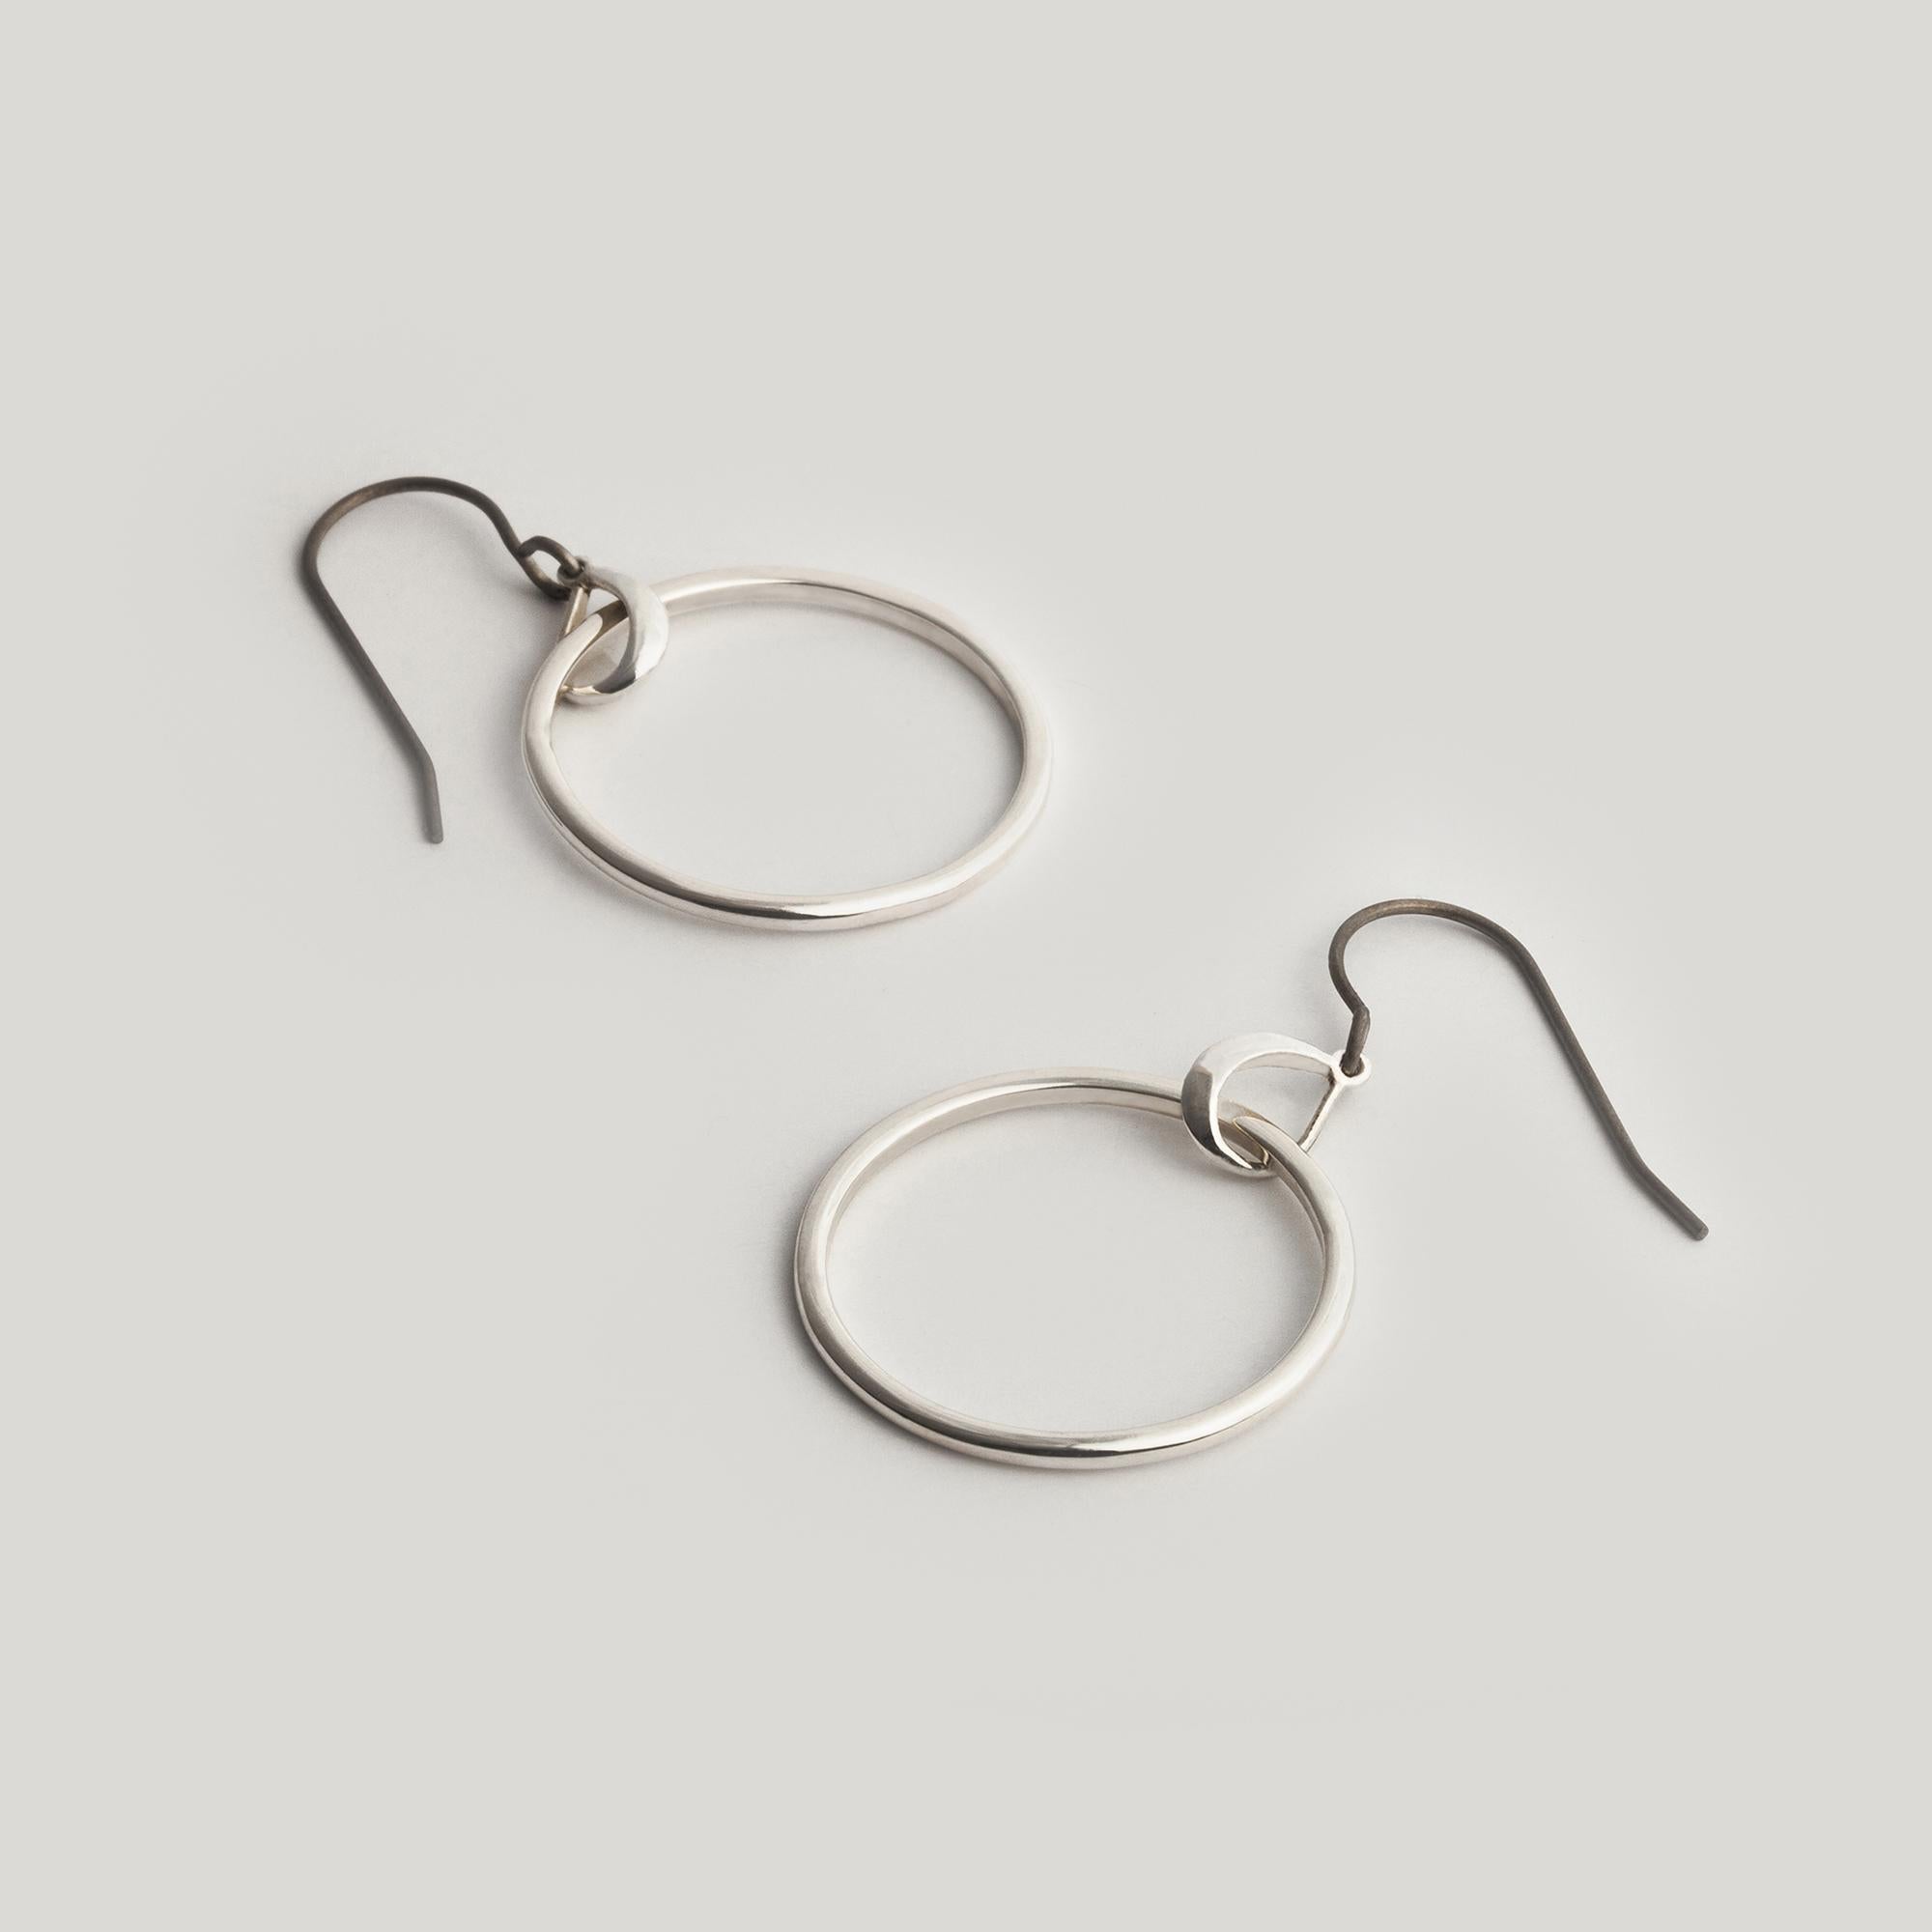 The Austra Hoops play on the concept of orbits, as movement is built into both static and free elements within the design. The suspended hoop is half round wire, half square wire, flowing seamlessly into one another. A dynamic element only seen once